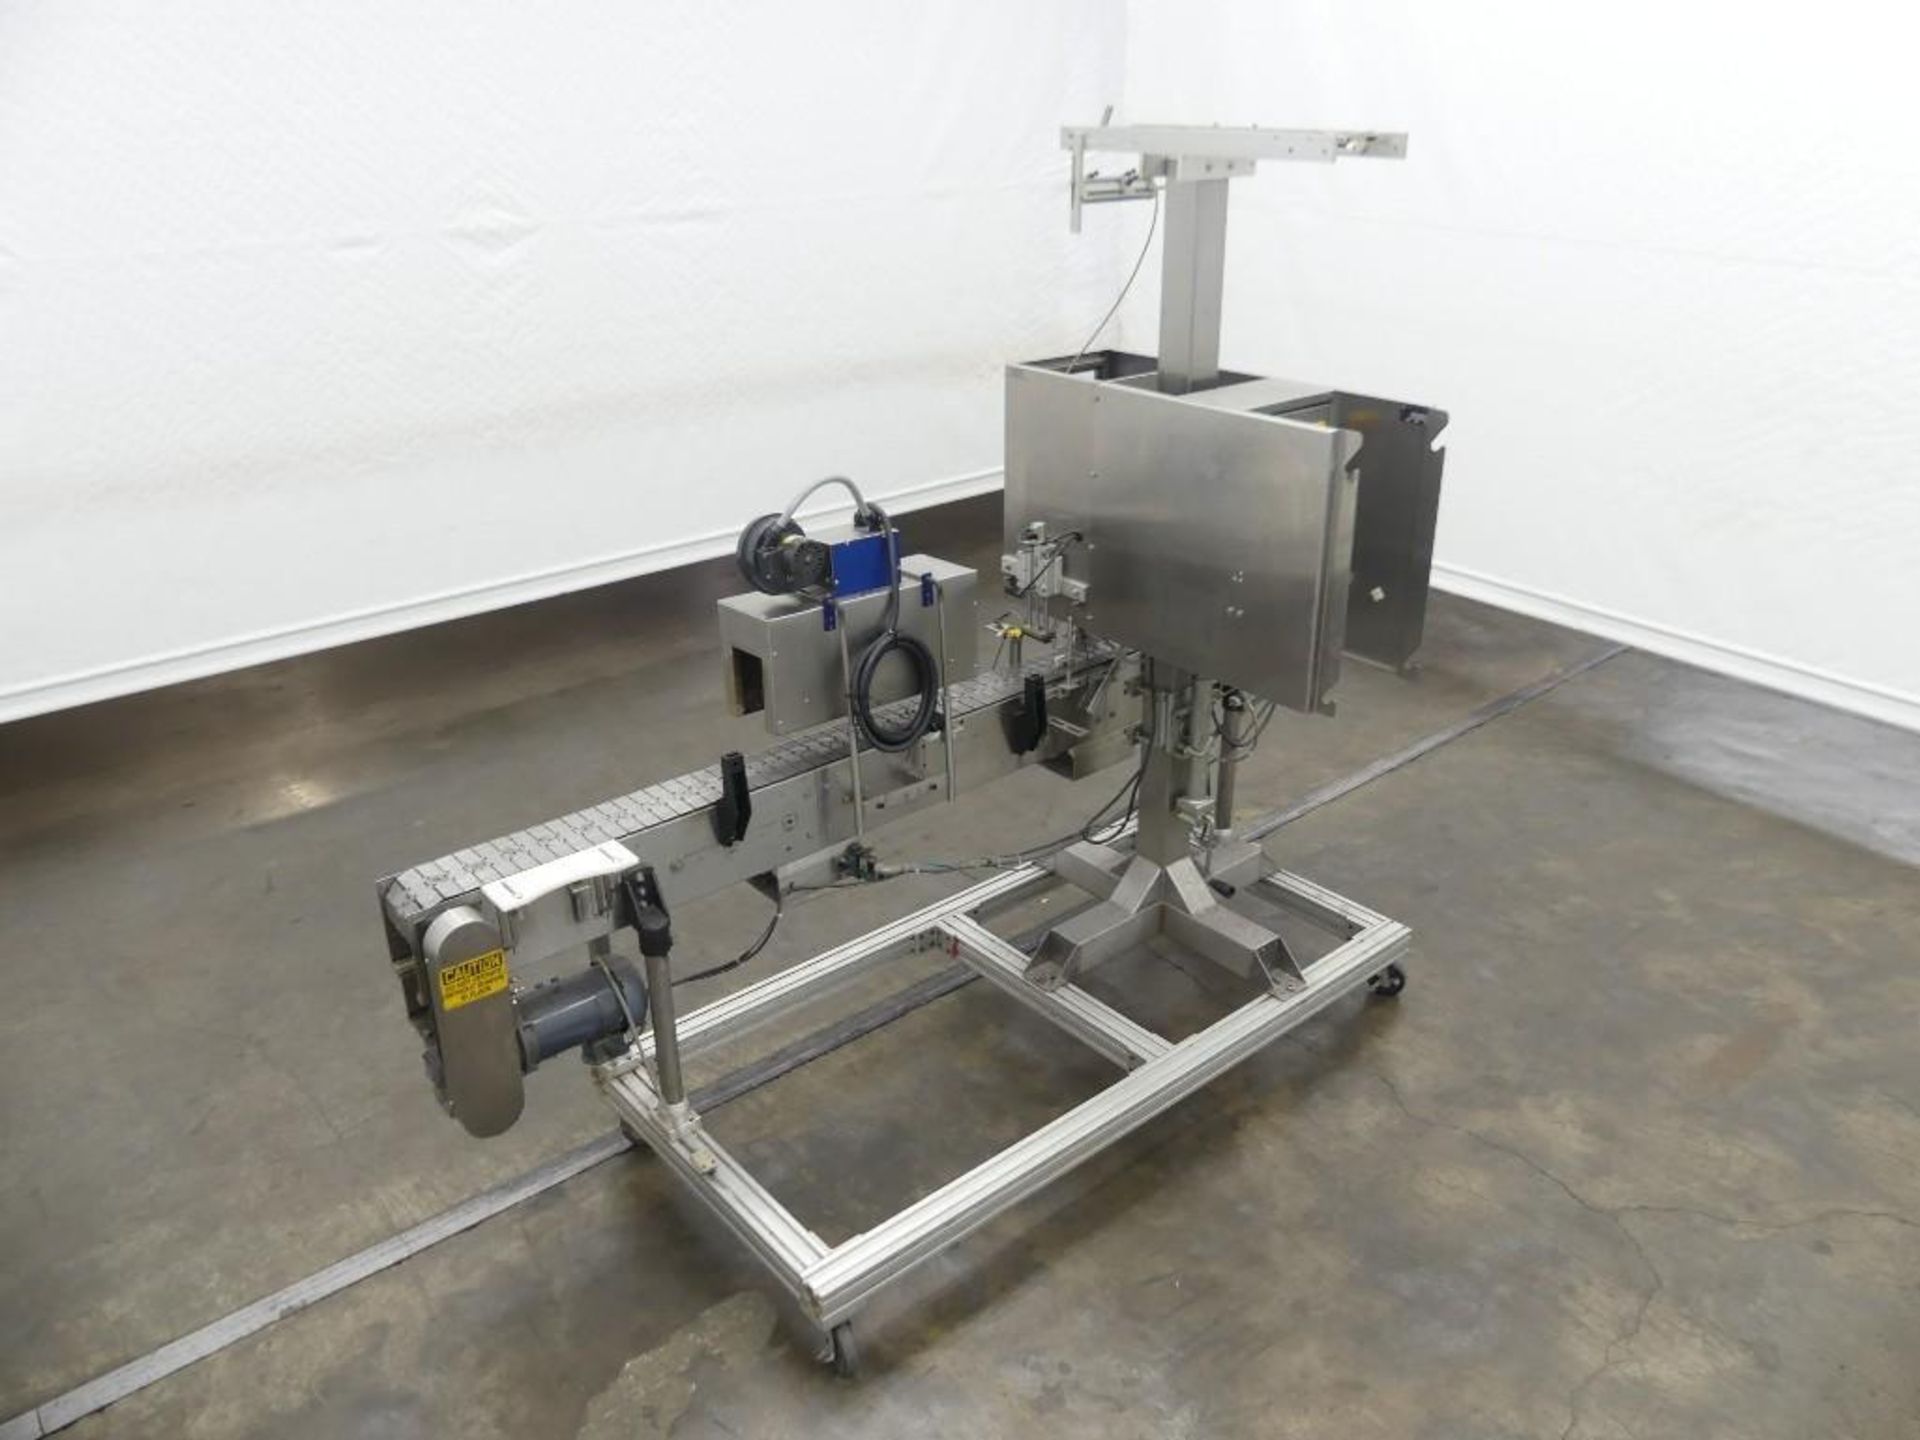 Axon EZ-100 Stainless Steel Sleeve Applicator with Marburg Industries Heat Tunnel - Image 18 of 41